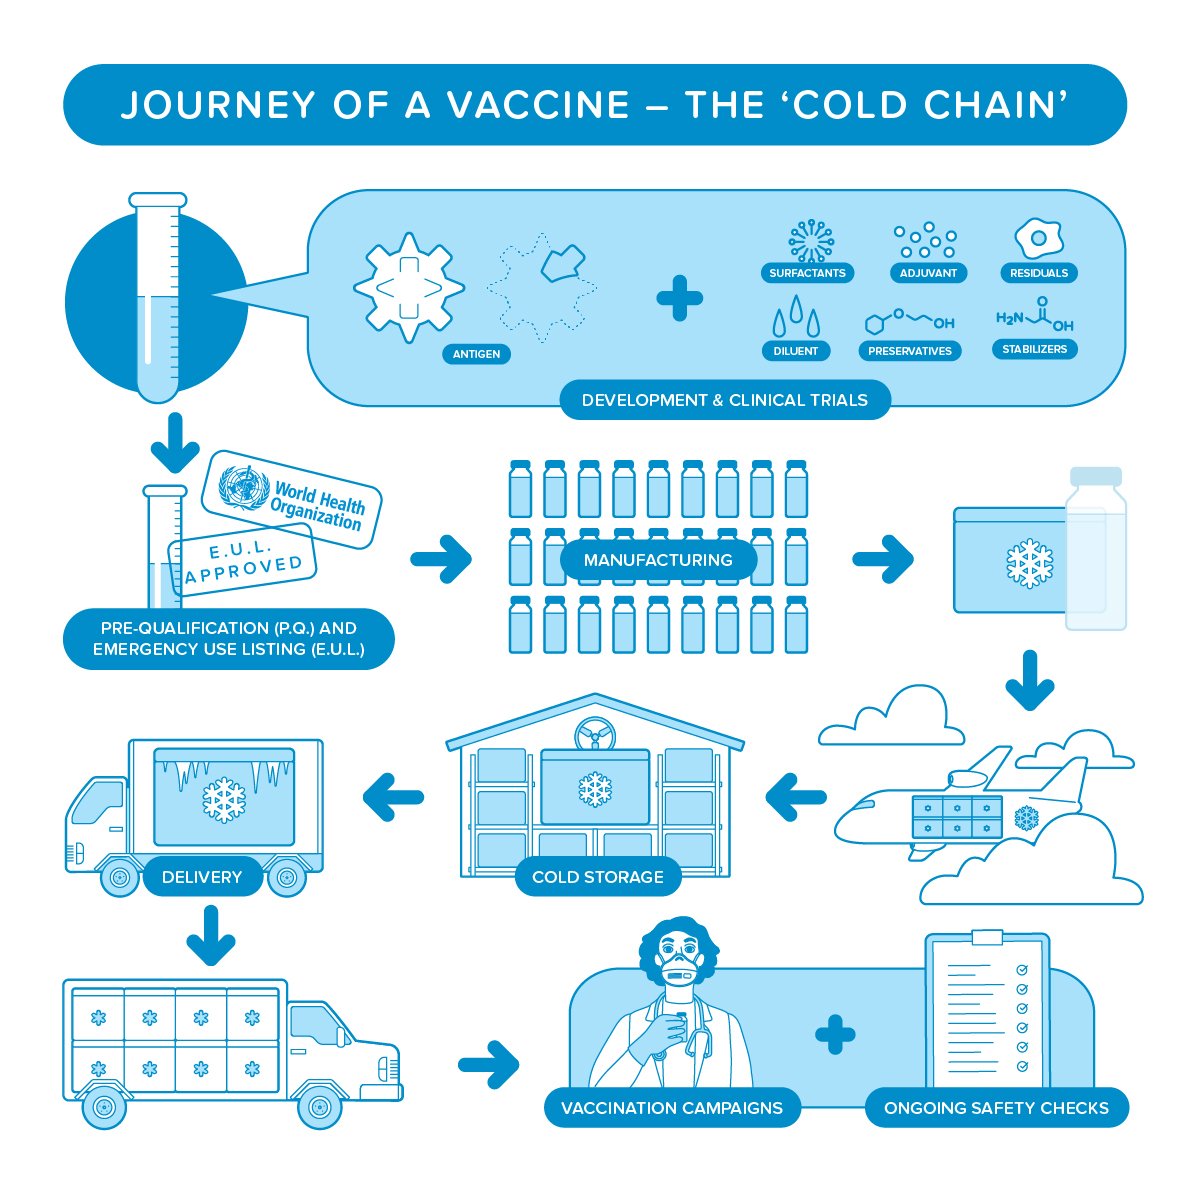 How is a vaccine shippedTo maintain this cold chain, vaccines are shipped using specialized equipmentRefrigerated lorries transport the vaccines to the cold roomPortable iceboxes are used to transport vaccines to regional centresMore info  http://bit.ly/3675hhZ 